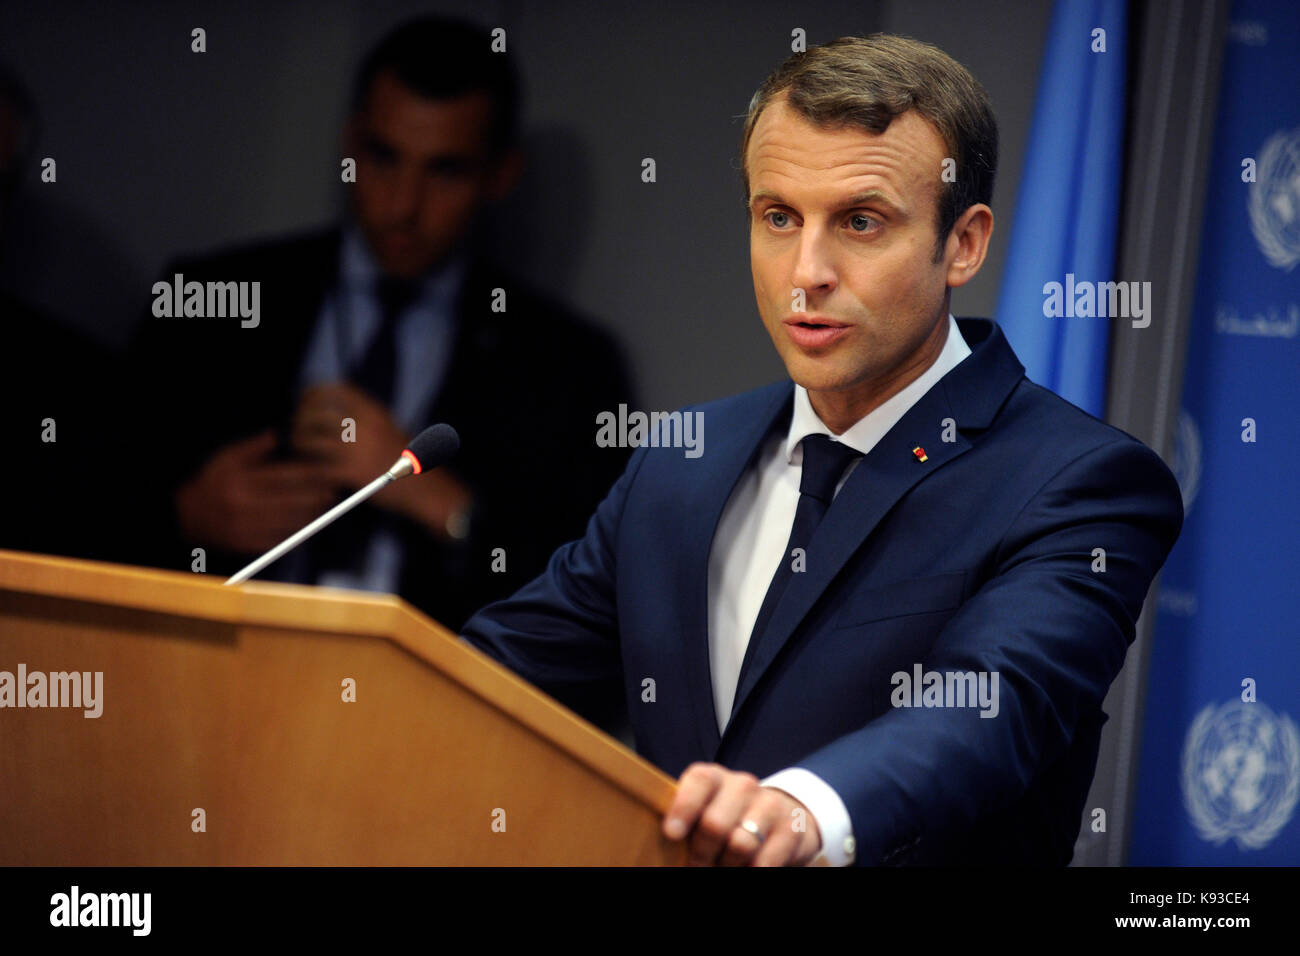 French President Emmanuel Macron holds a press conference at the United Nations on September 19, 2017 in New York City. Stock Photo